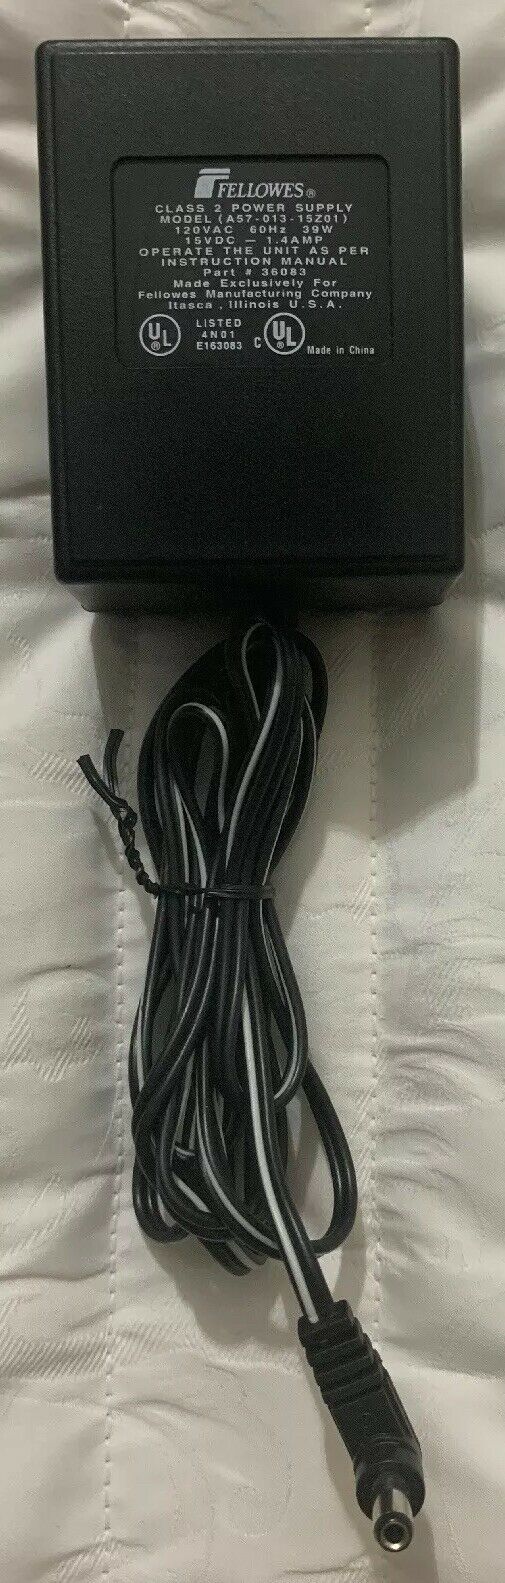 New Fellowes A57-013-15z01 15VDC 1.4A Adapter Power Supply